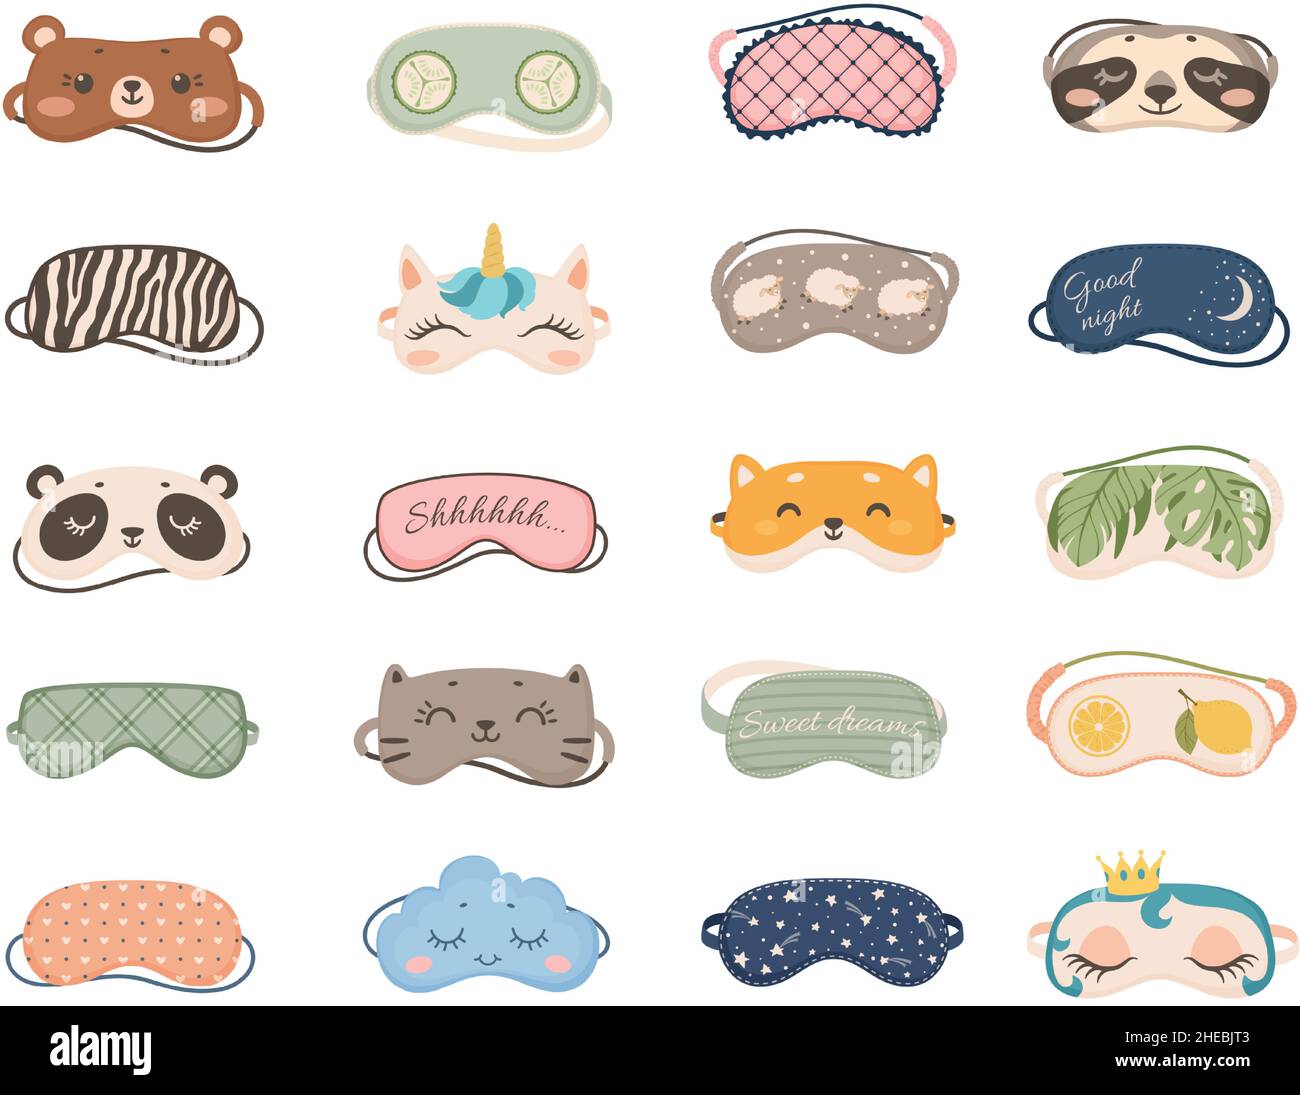 Cute sleeping masks with animals and patterns, night eye mask. Cartoon sleep accessories for dreaming, nightwear pajama elements vector set. Bedtime relaxation and rest, comfortable blindfold Stock Vector